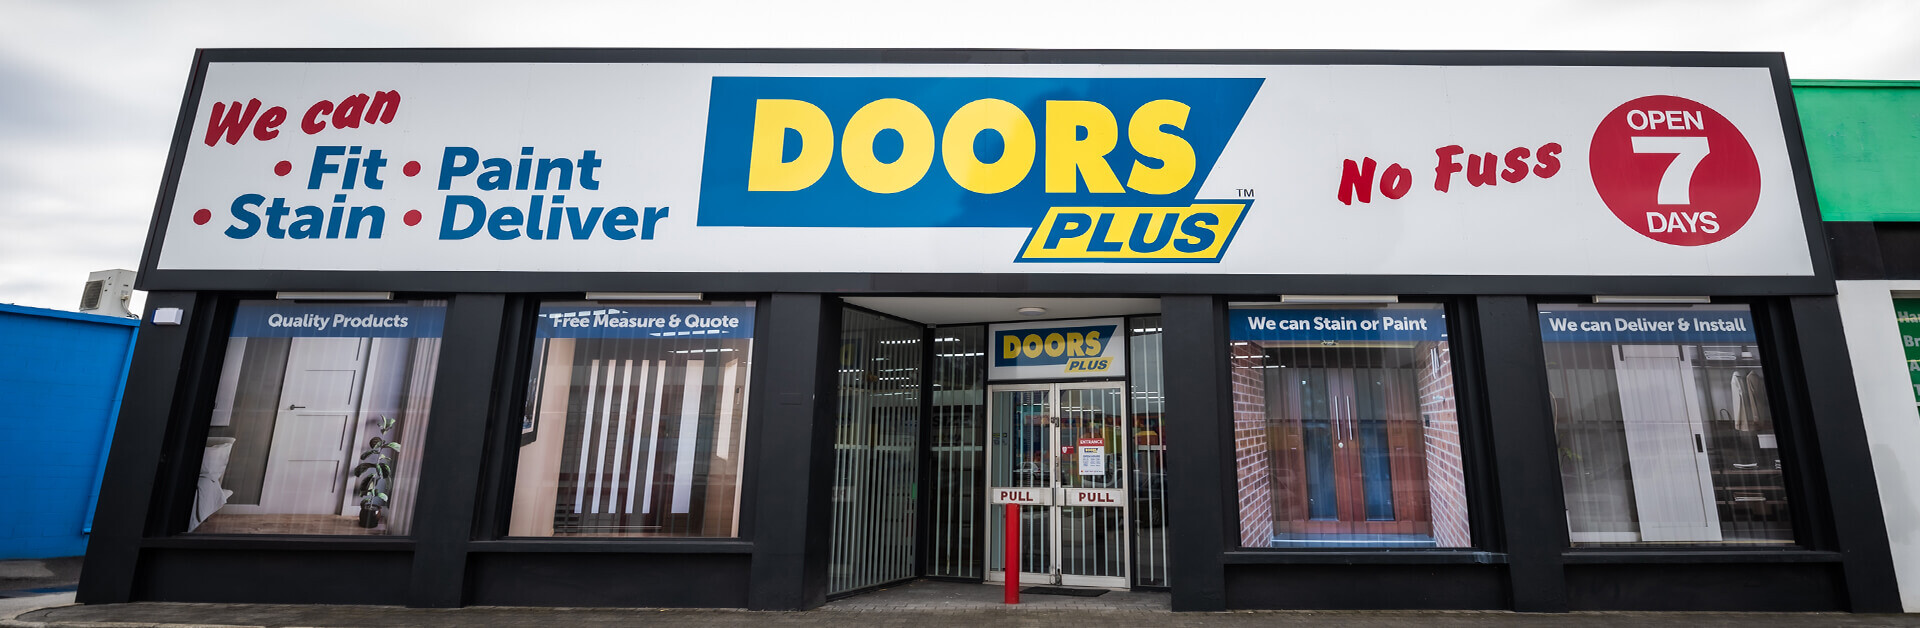 Doors Plus Cannington Showroom in Perth entrance view